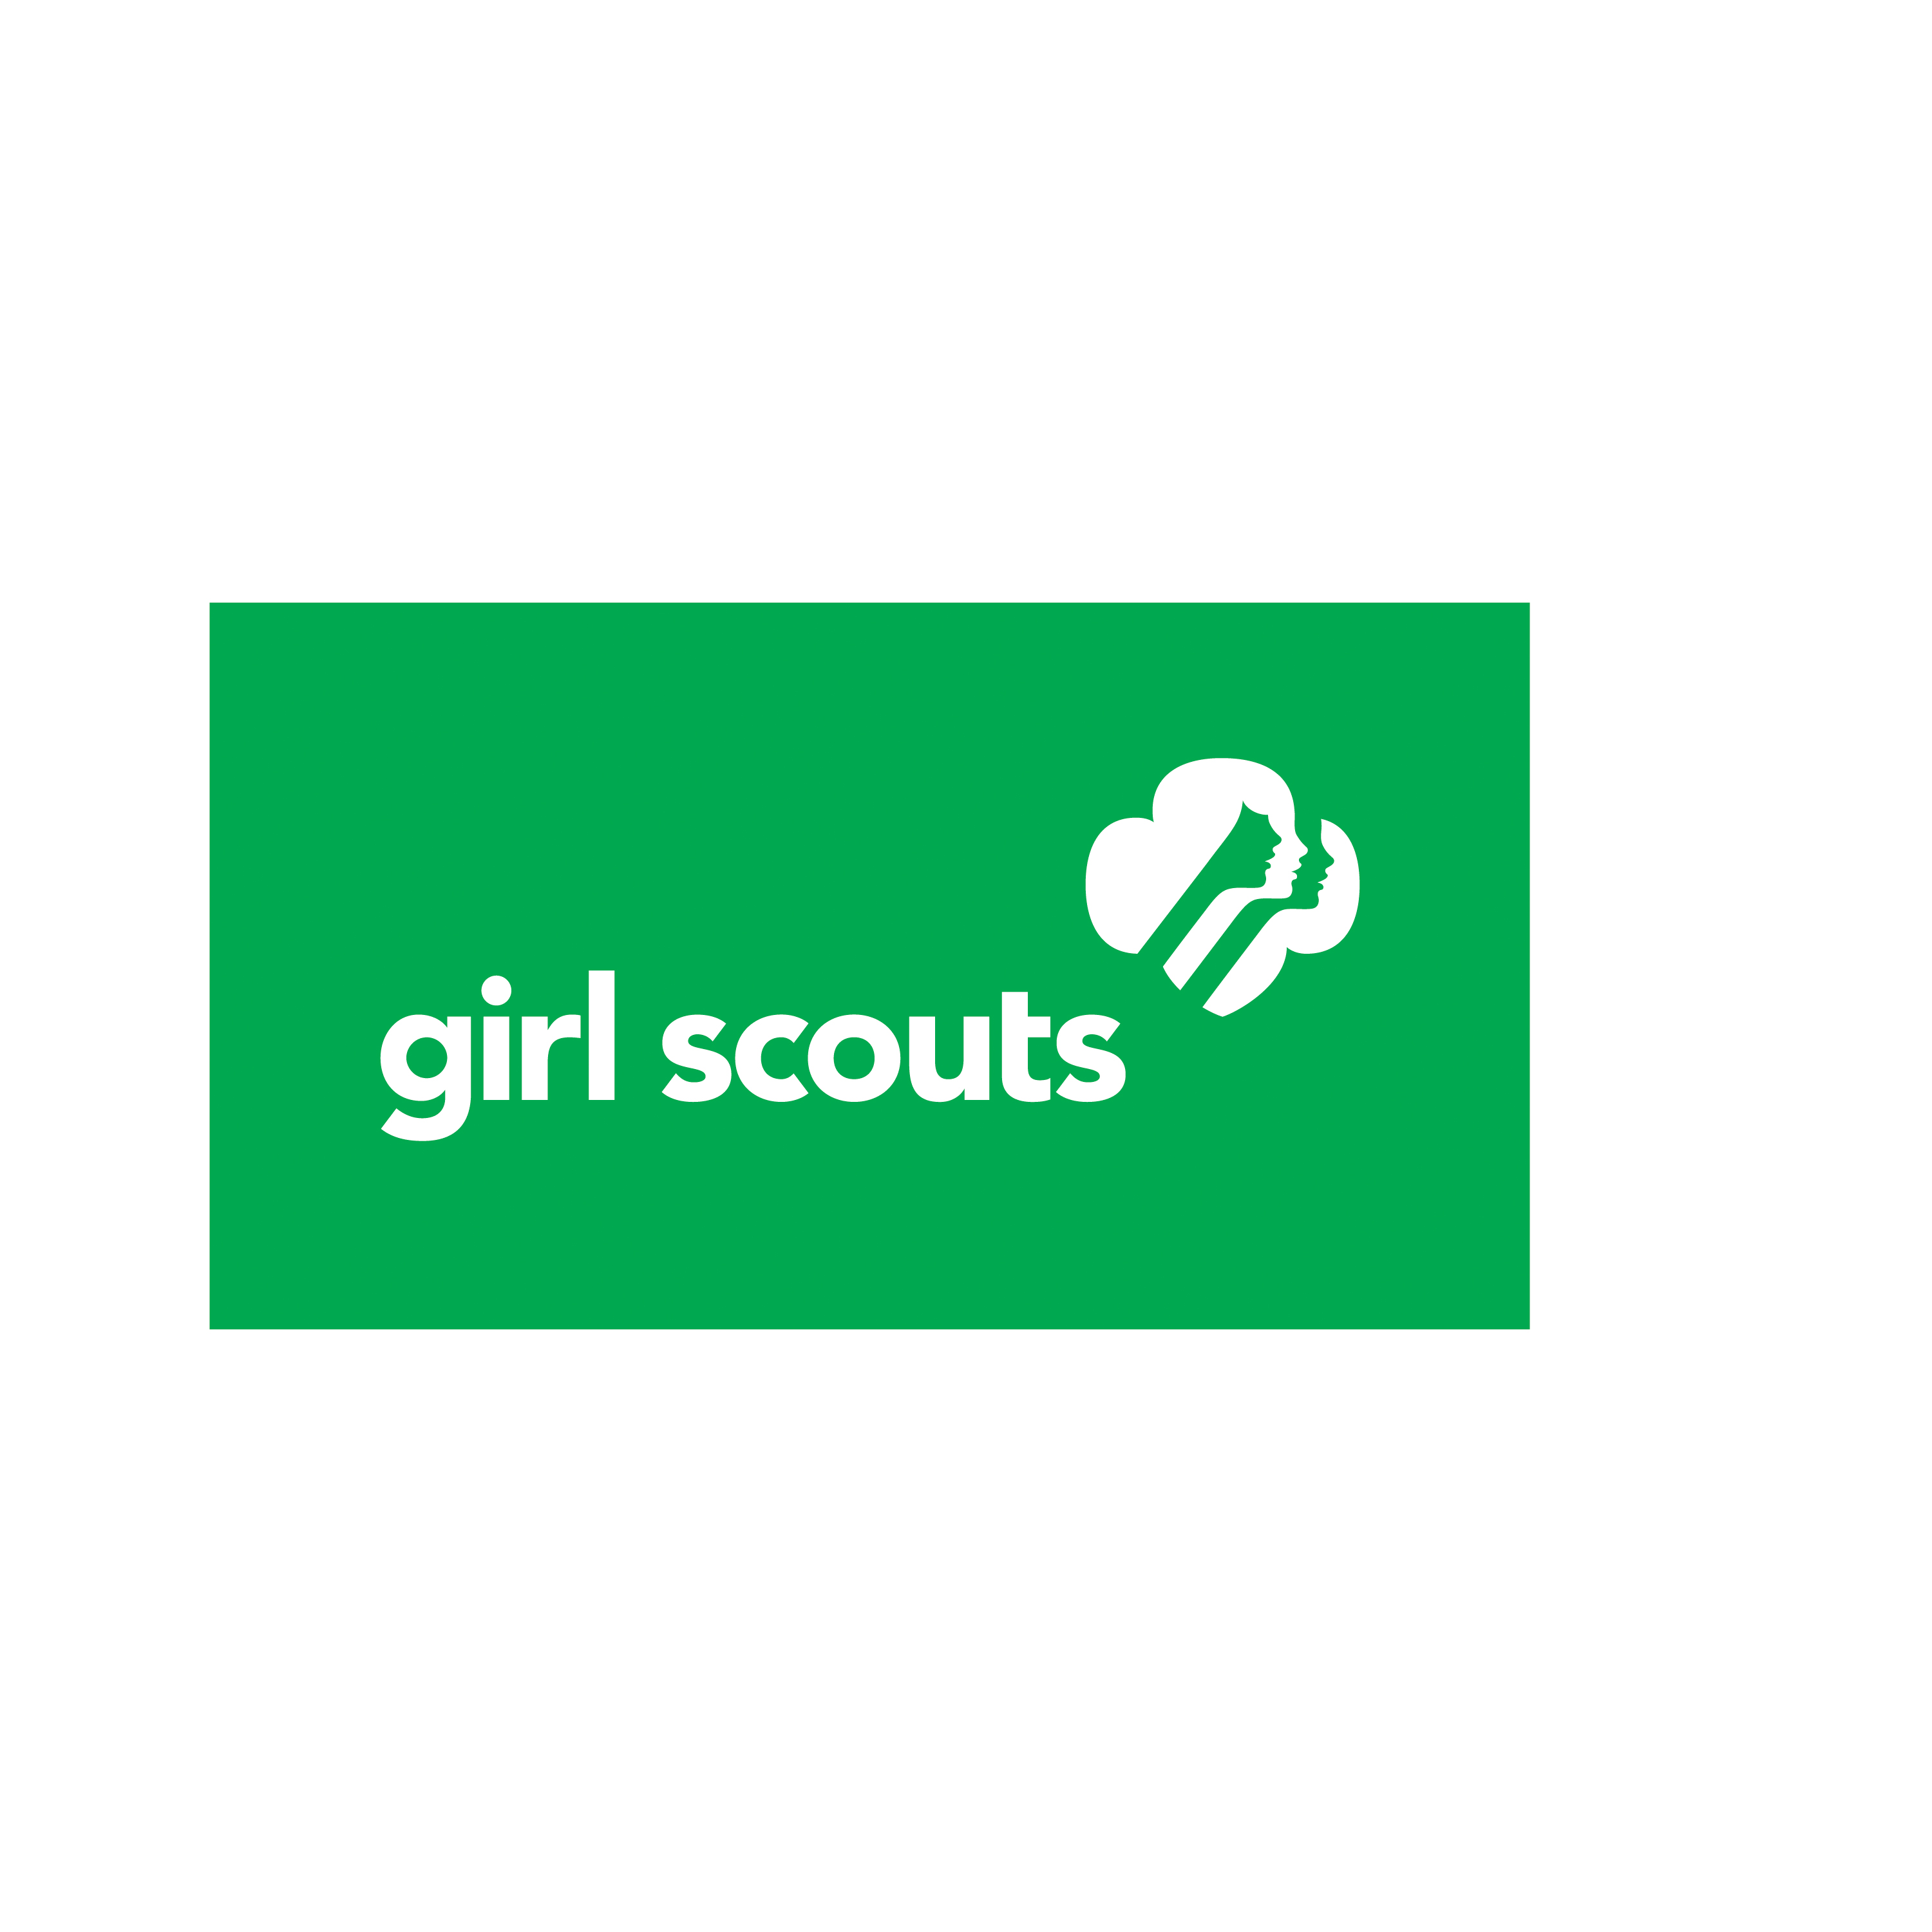 clip art for girl scouts - photo #41